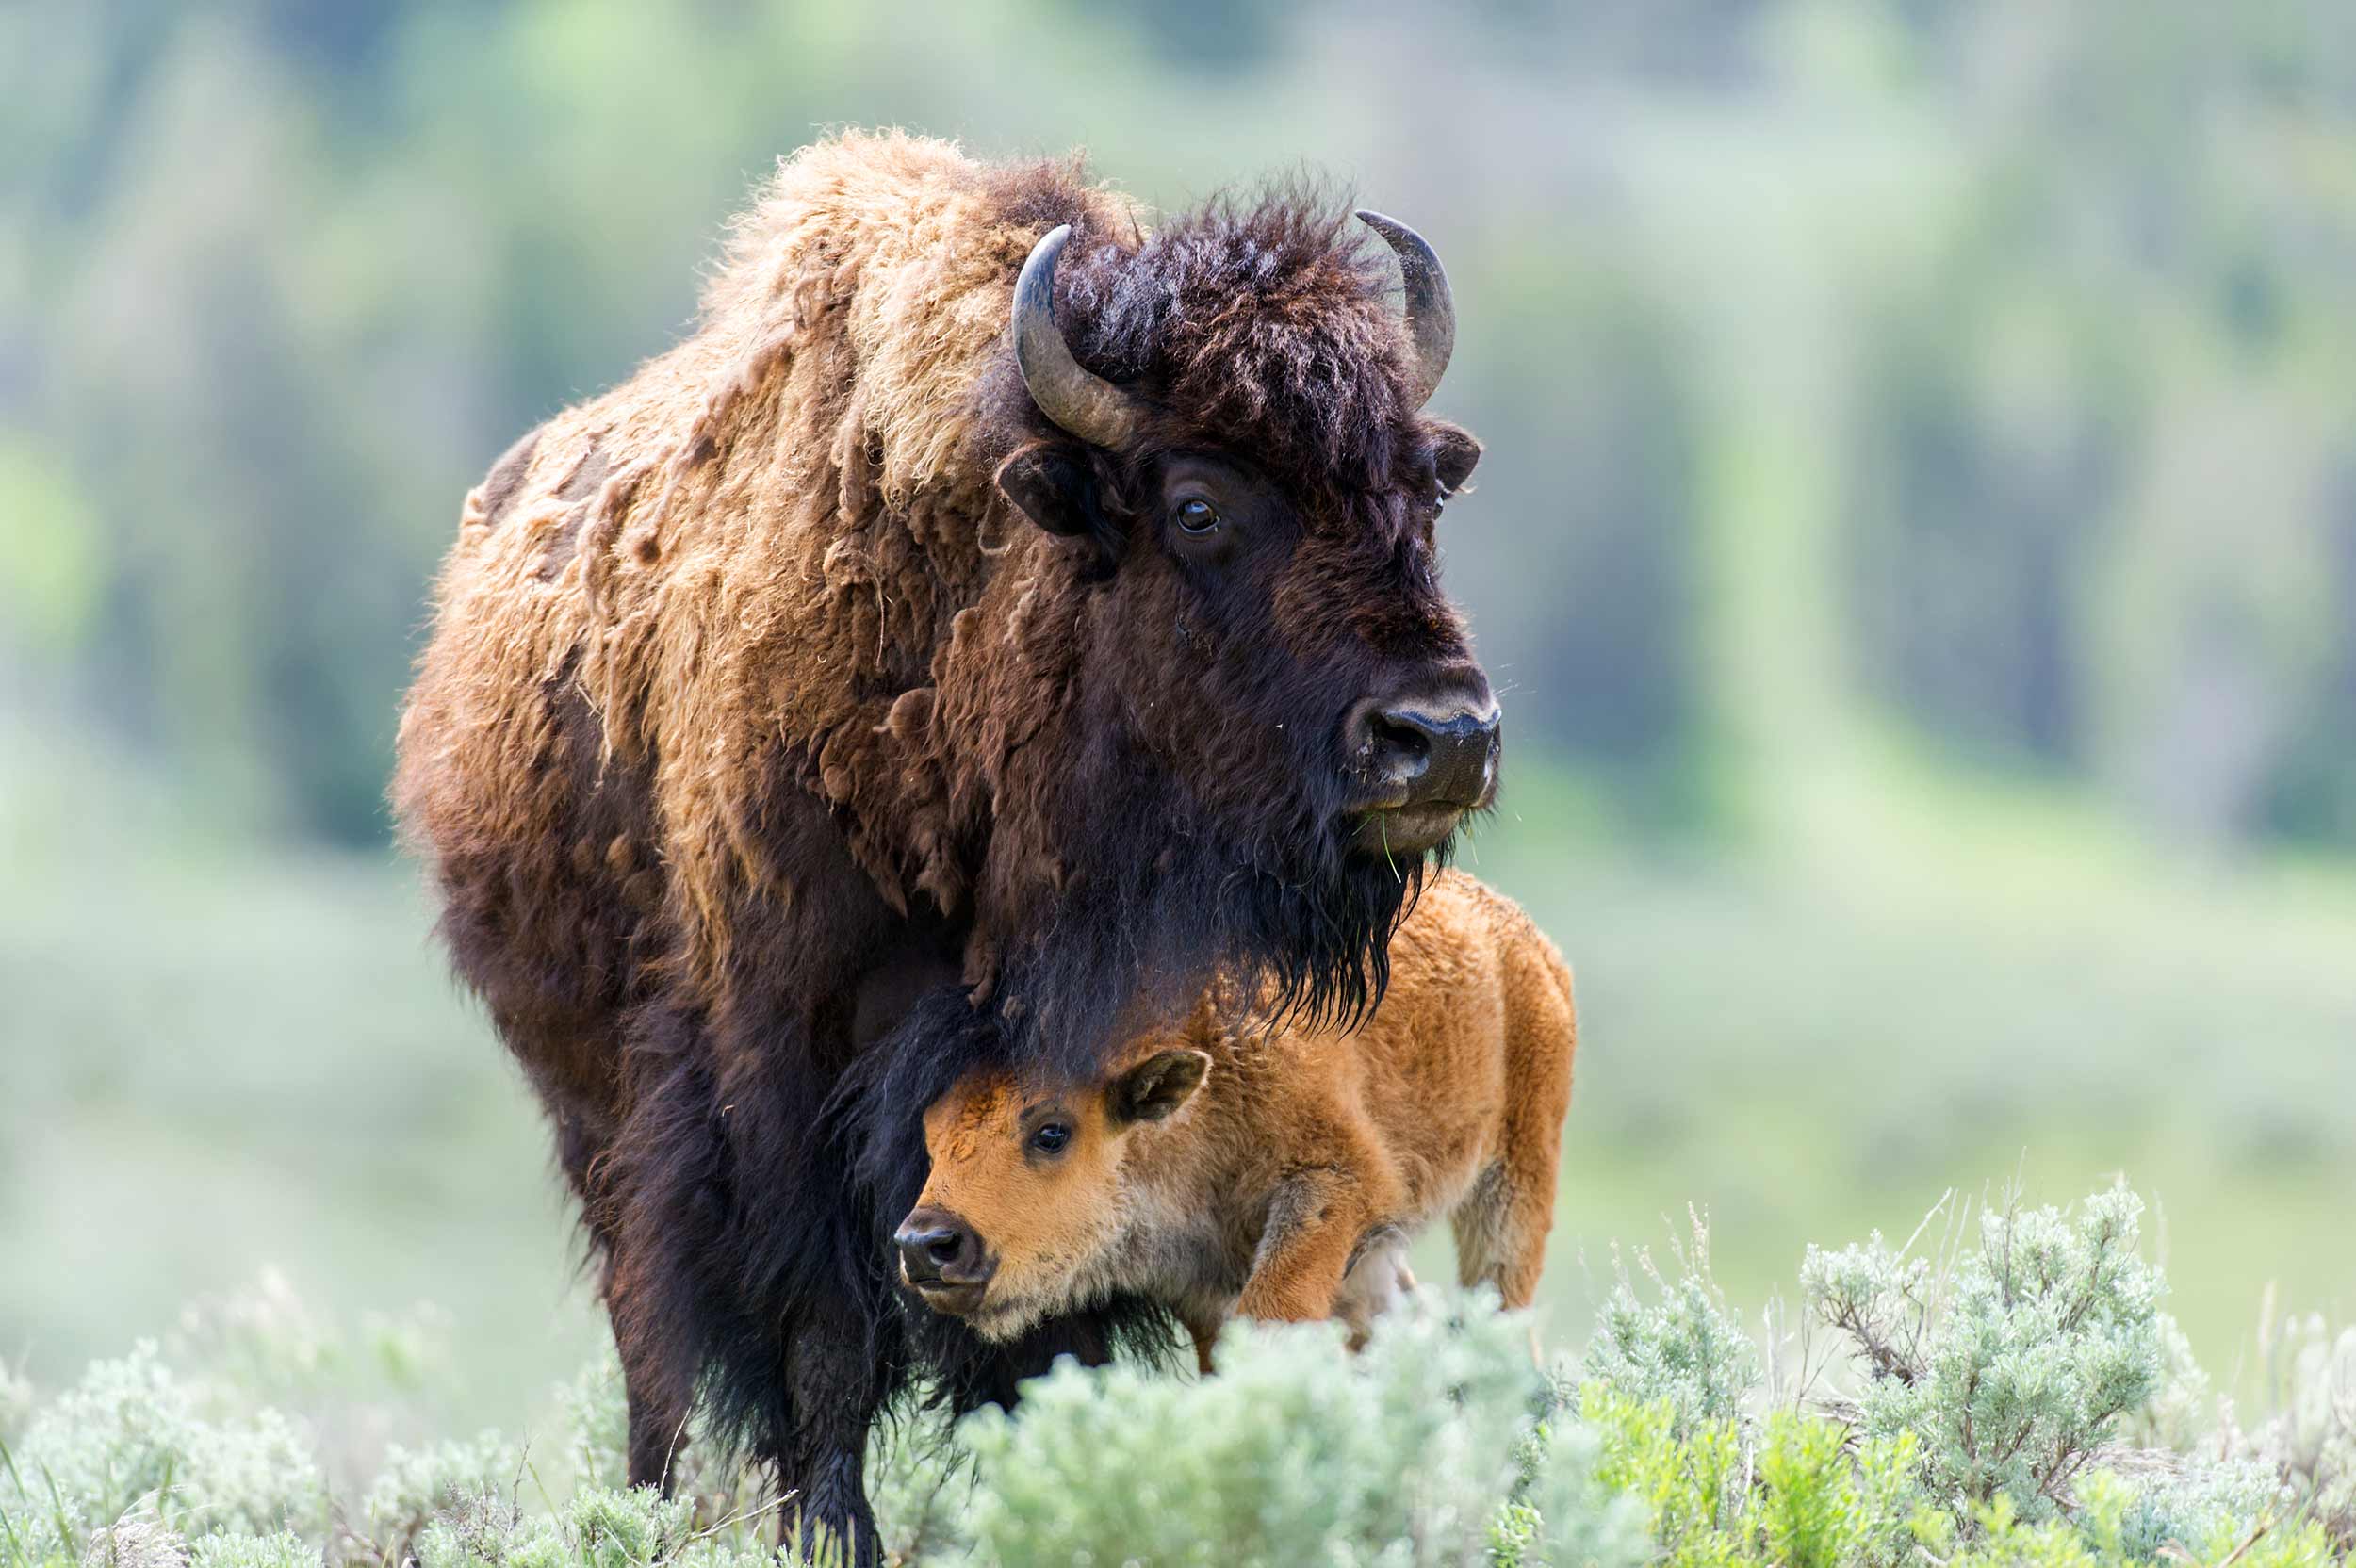 Cow and Calf Bison